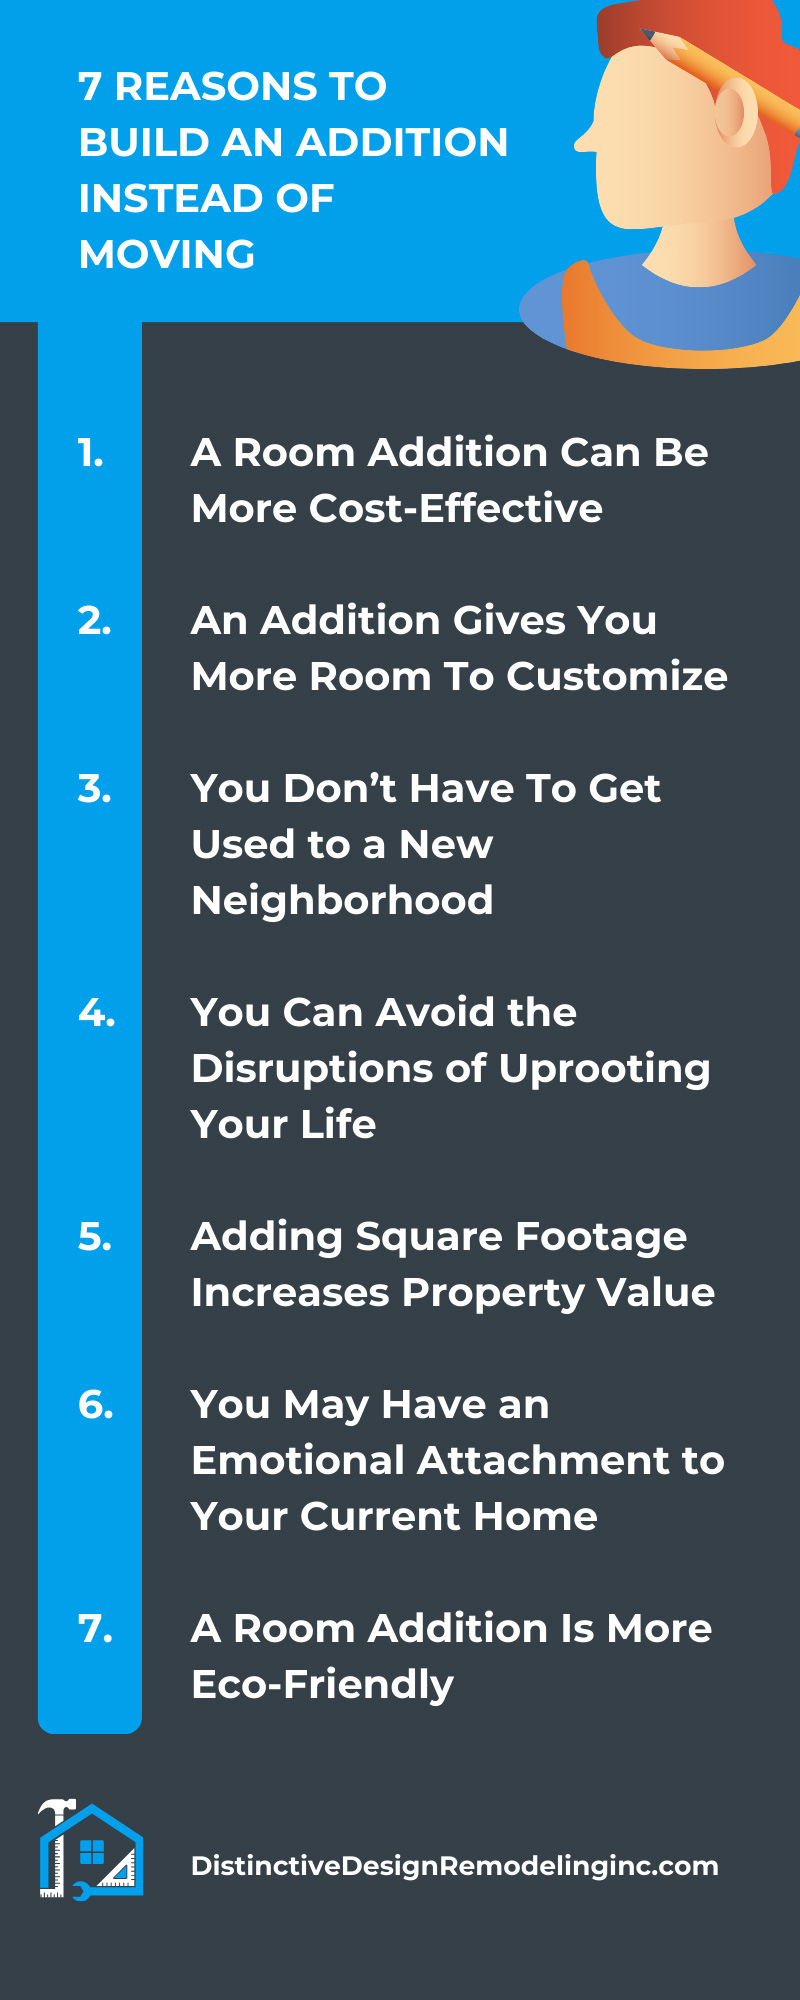 7 Reasons To Build an Addition Instead of Moving